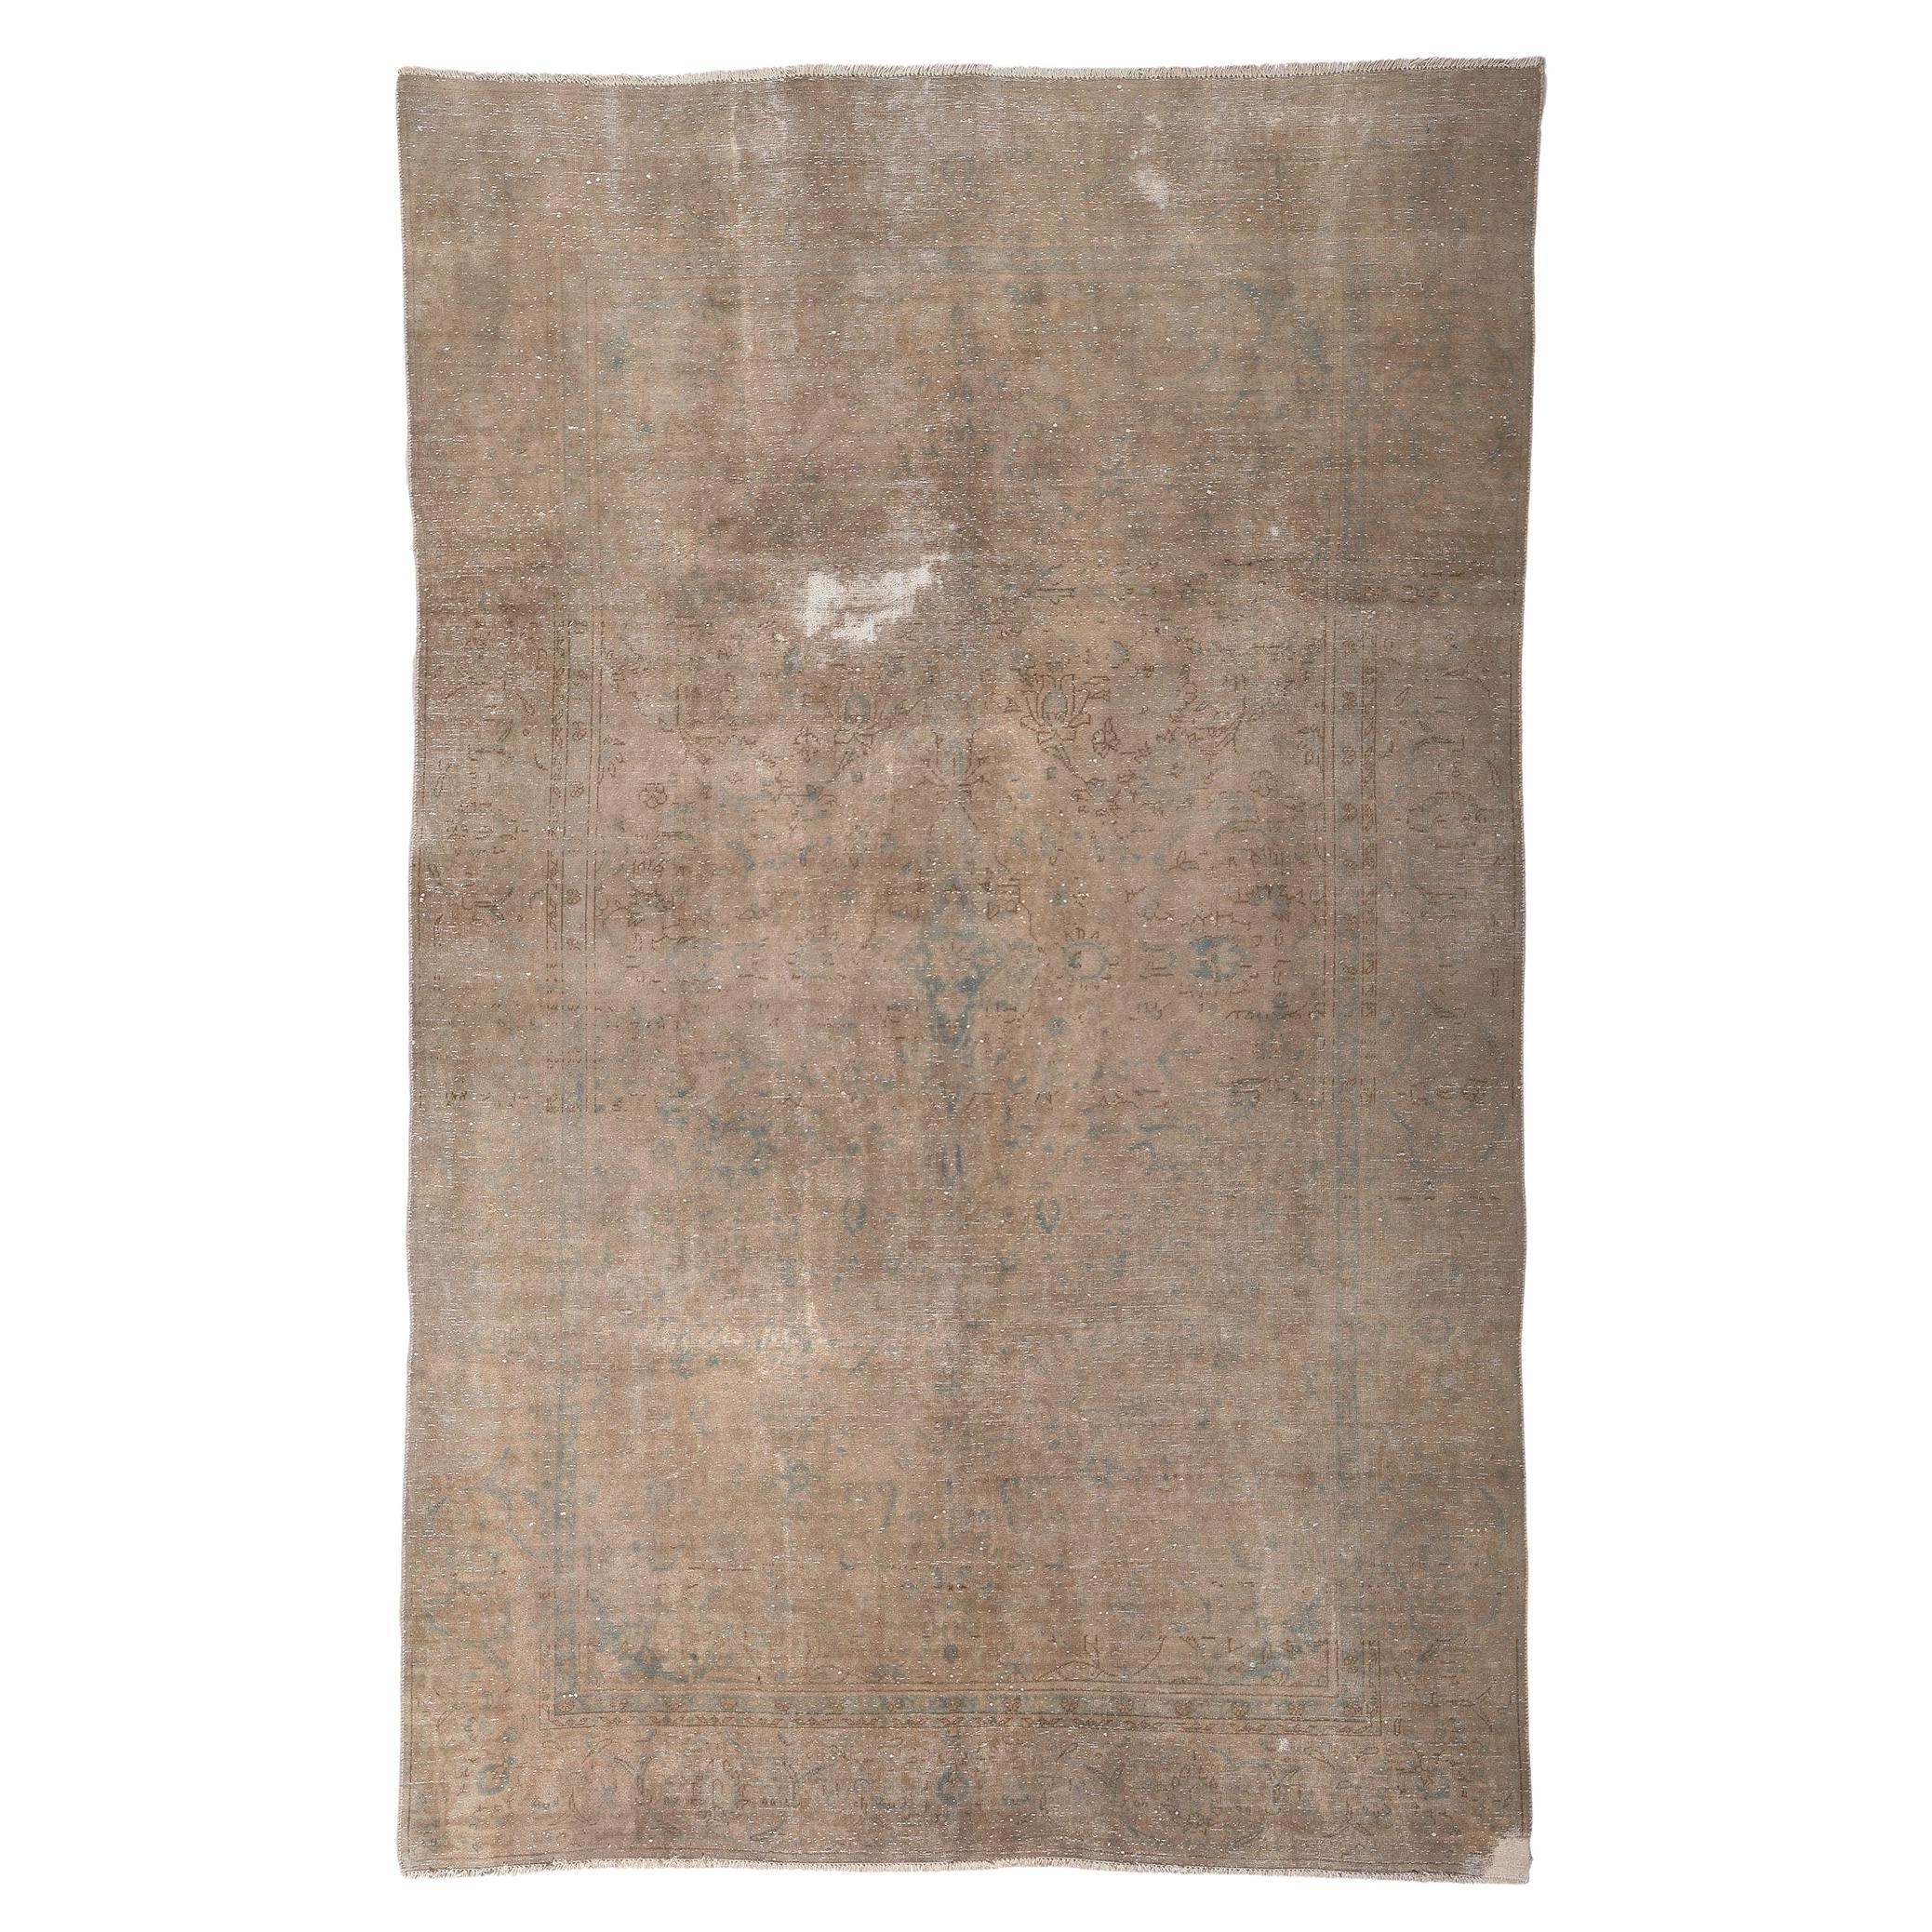 Distressed Faded Antique Persian Rug, Shabby Chic Luxe Meets Earth-Tone Elegance